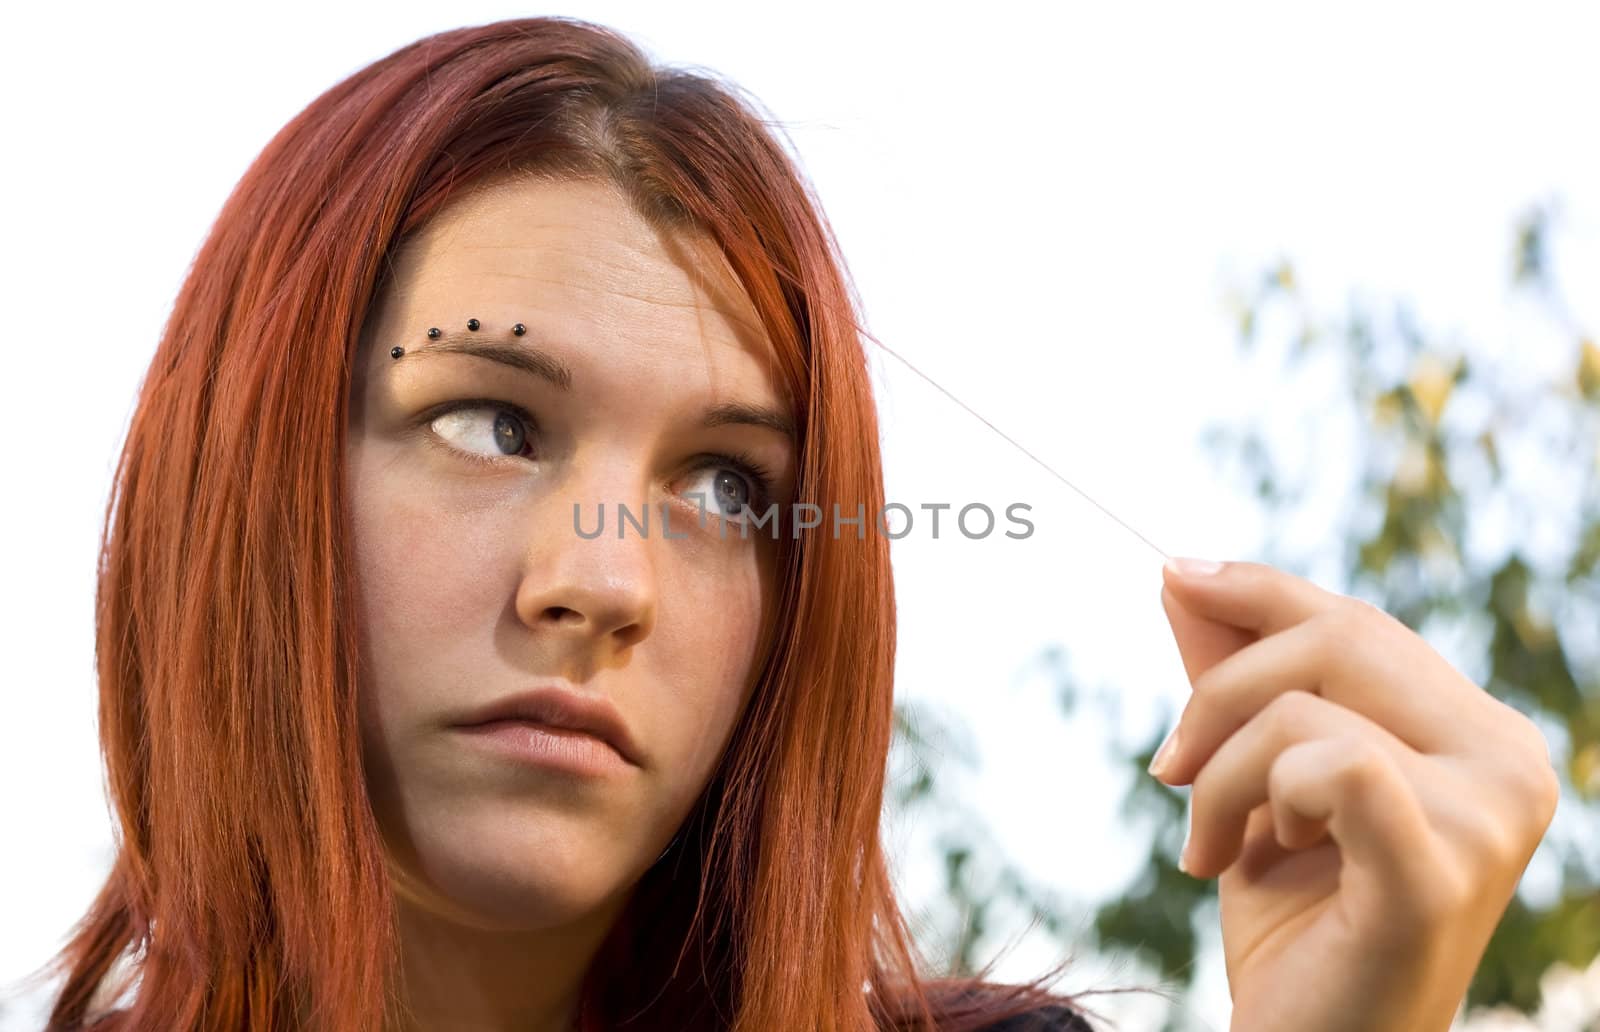 Portrait of a cute redhead looking at one hair with eyes crossed